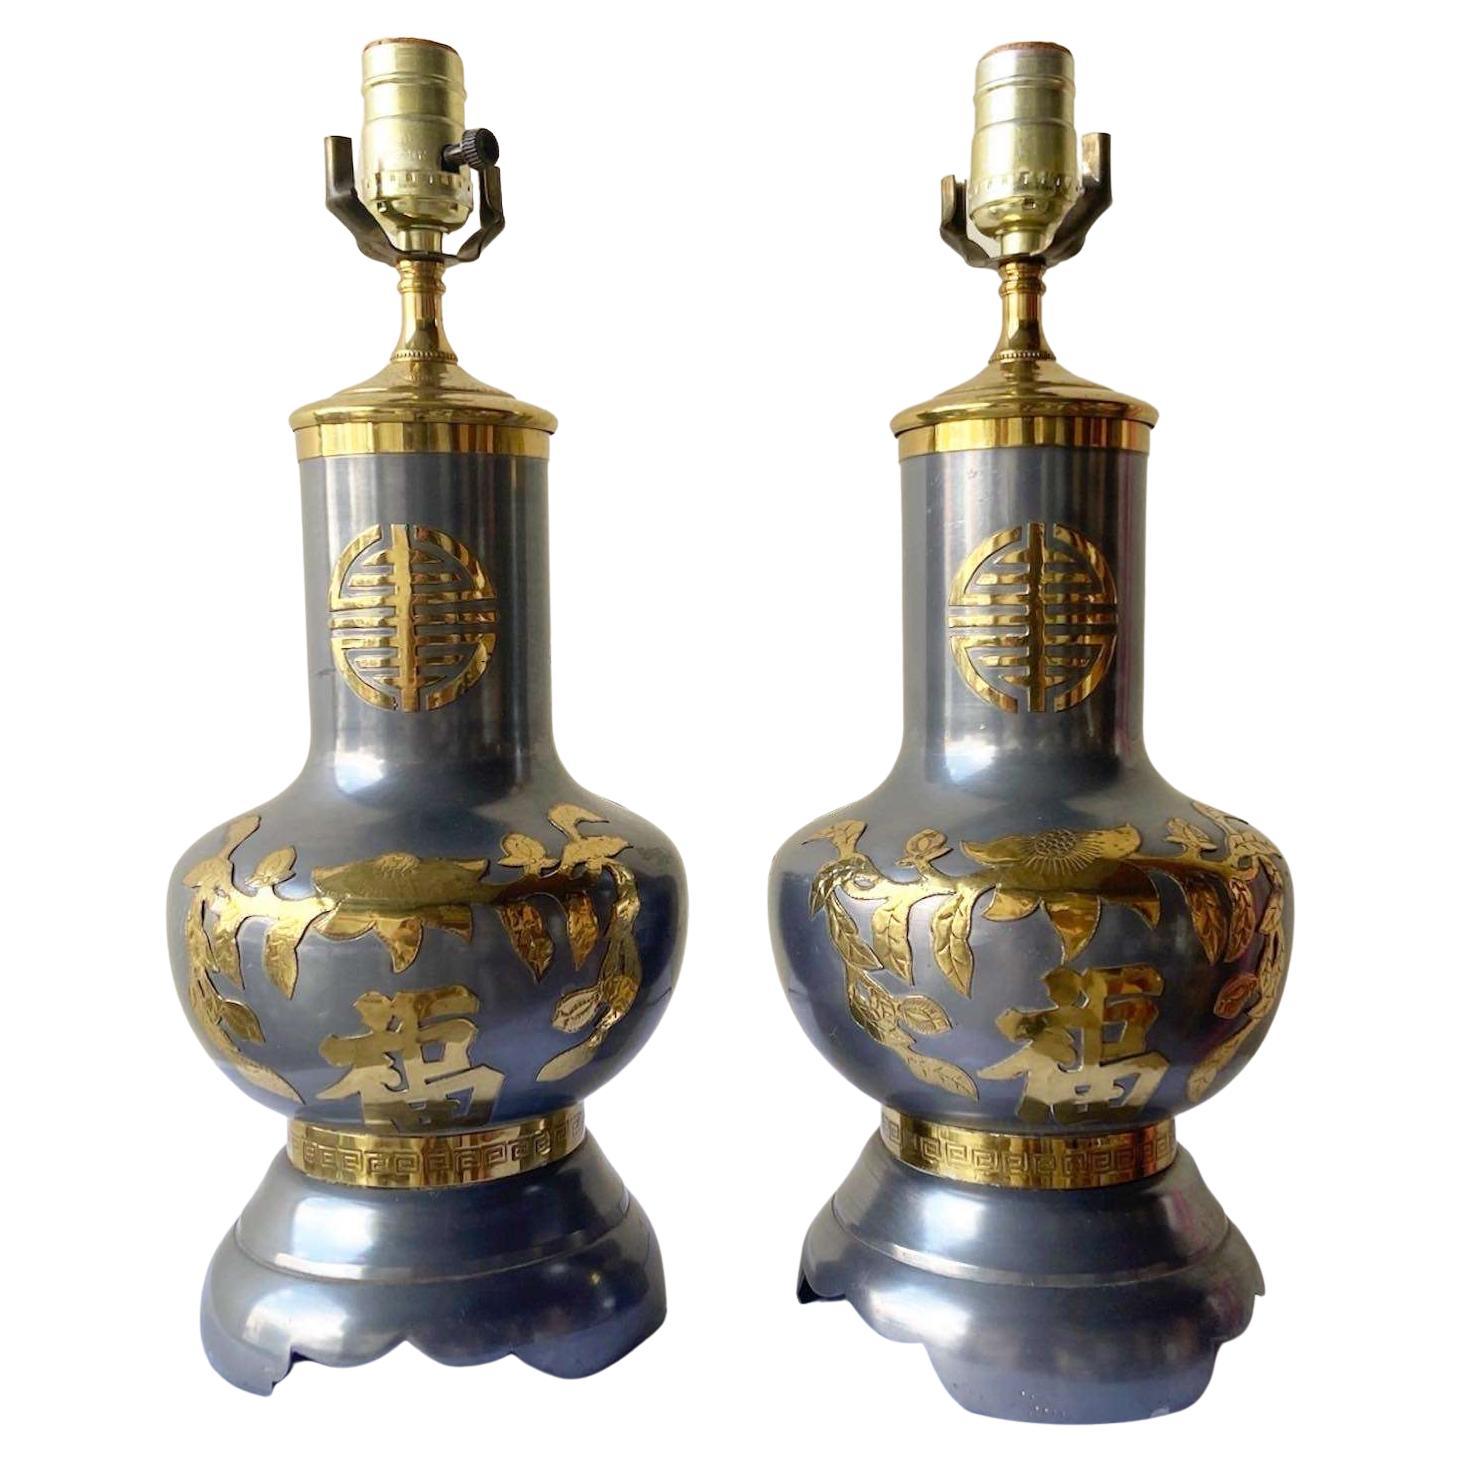 Vintage Chinoiserie Metal With Gold Table Lamps - a Pair For Sale